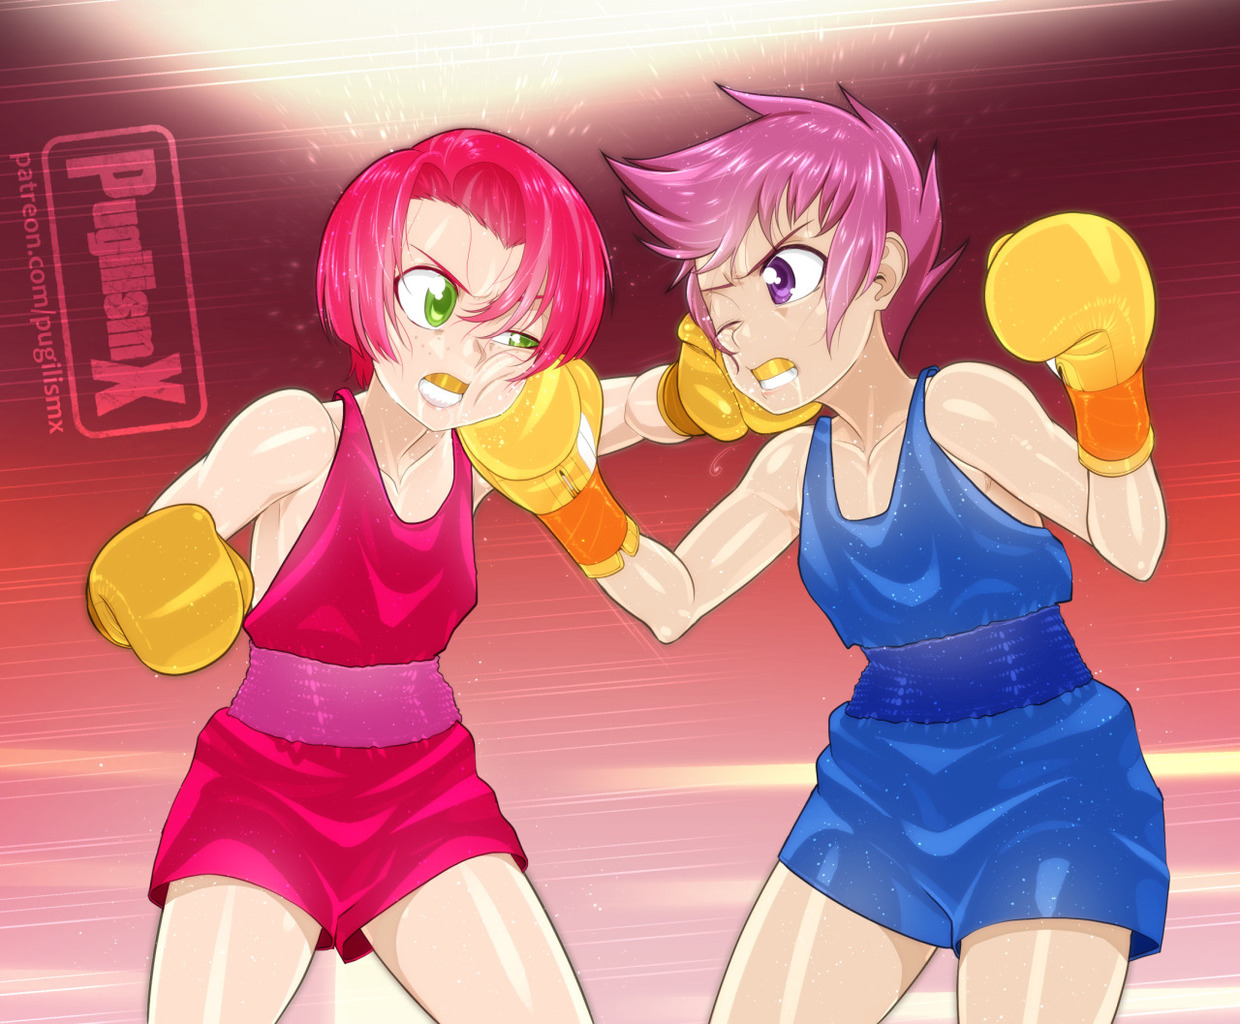 1765928 Safe Artistpugilismx Babs Seed Scootaloo Human Boxing Boxing Gloves Fight 8055